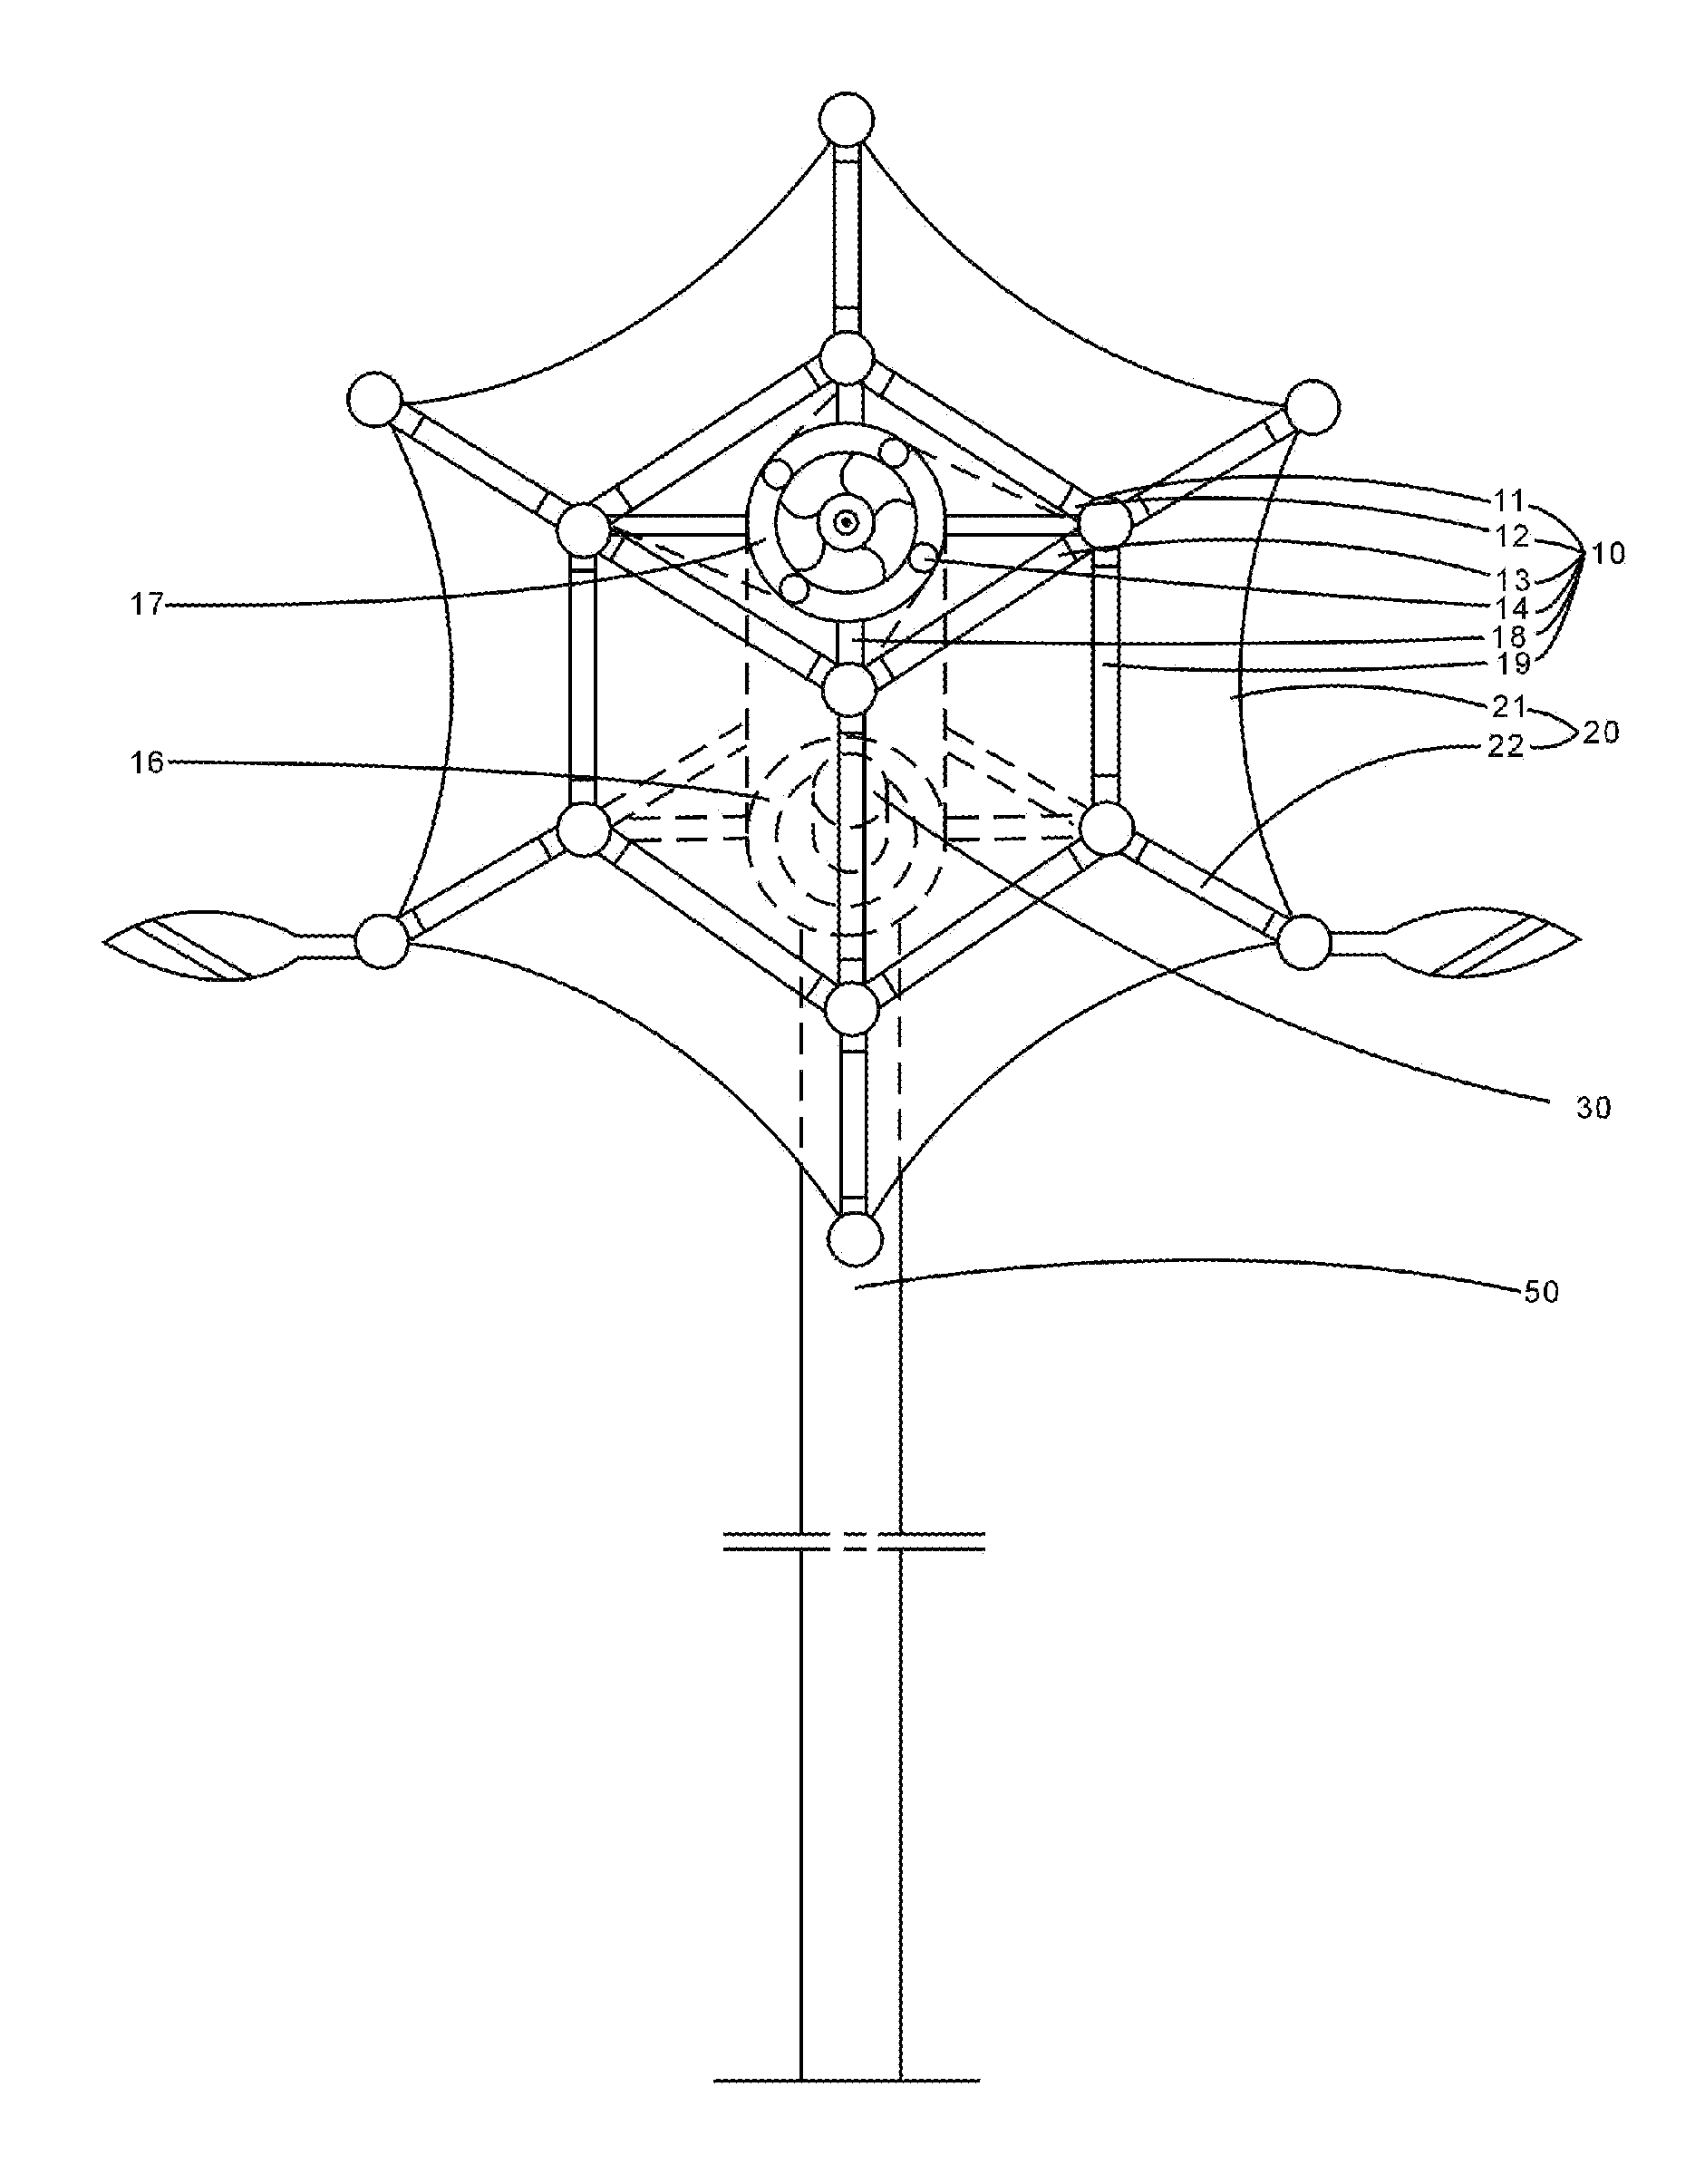 Three-dimensional wind-light congregating power generating system with spherical joints